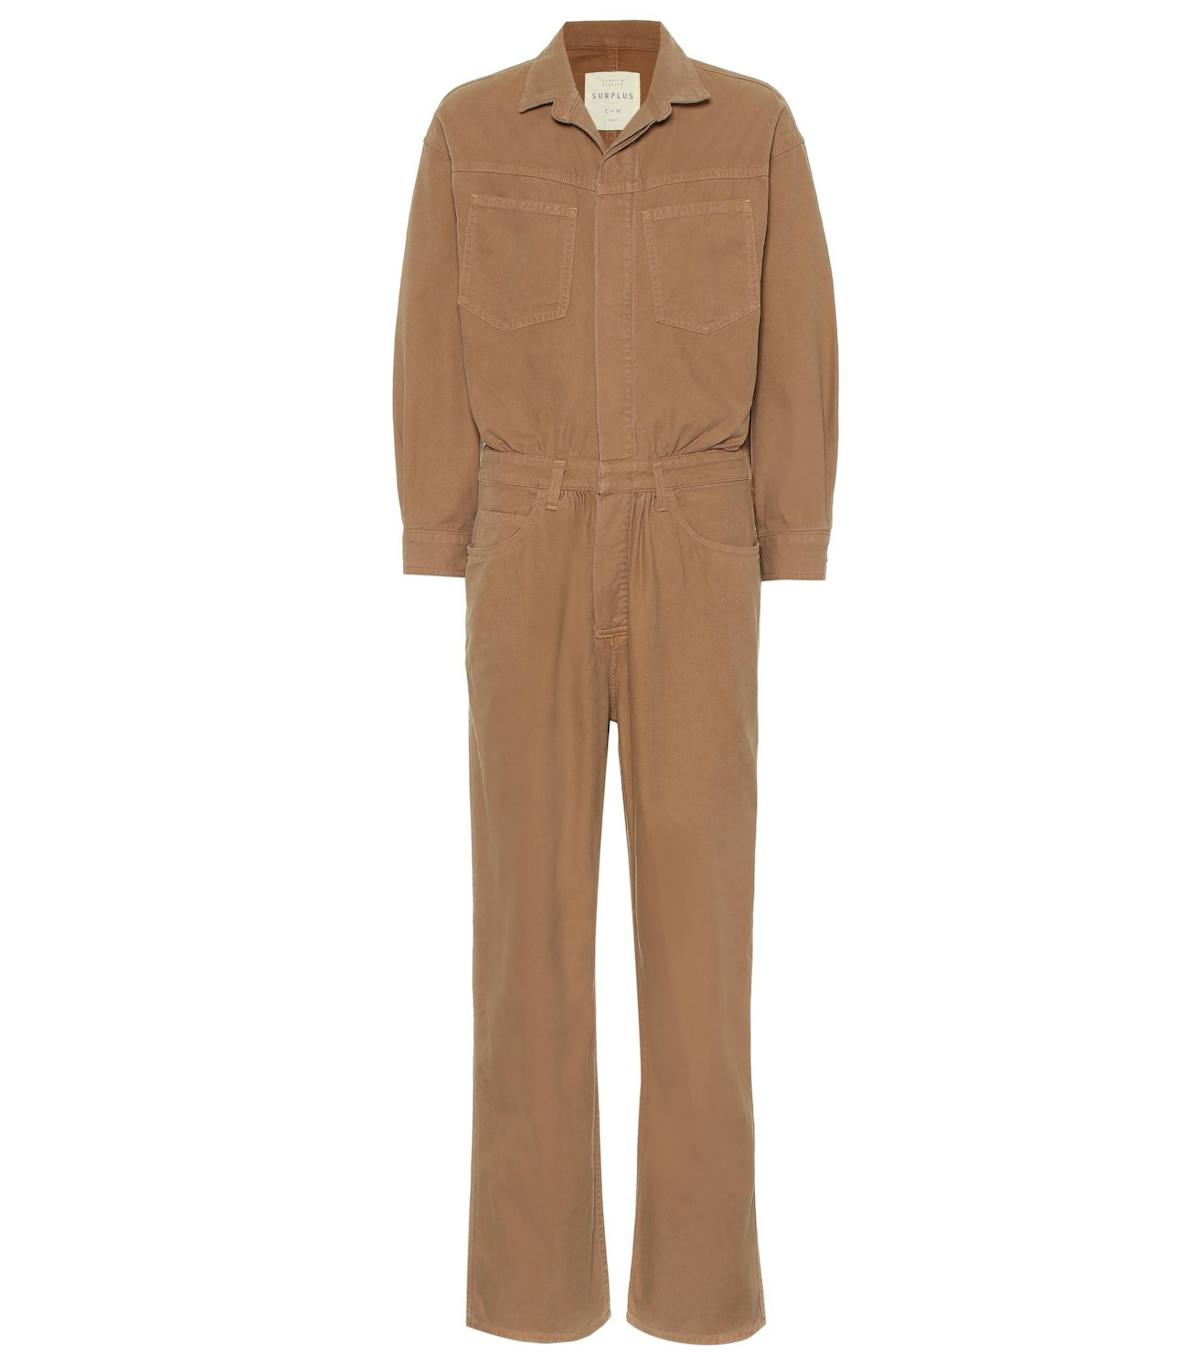 Best boiler suits to style for summer to autumn